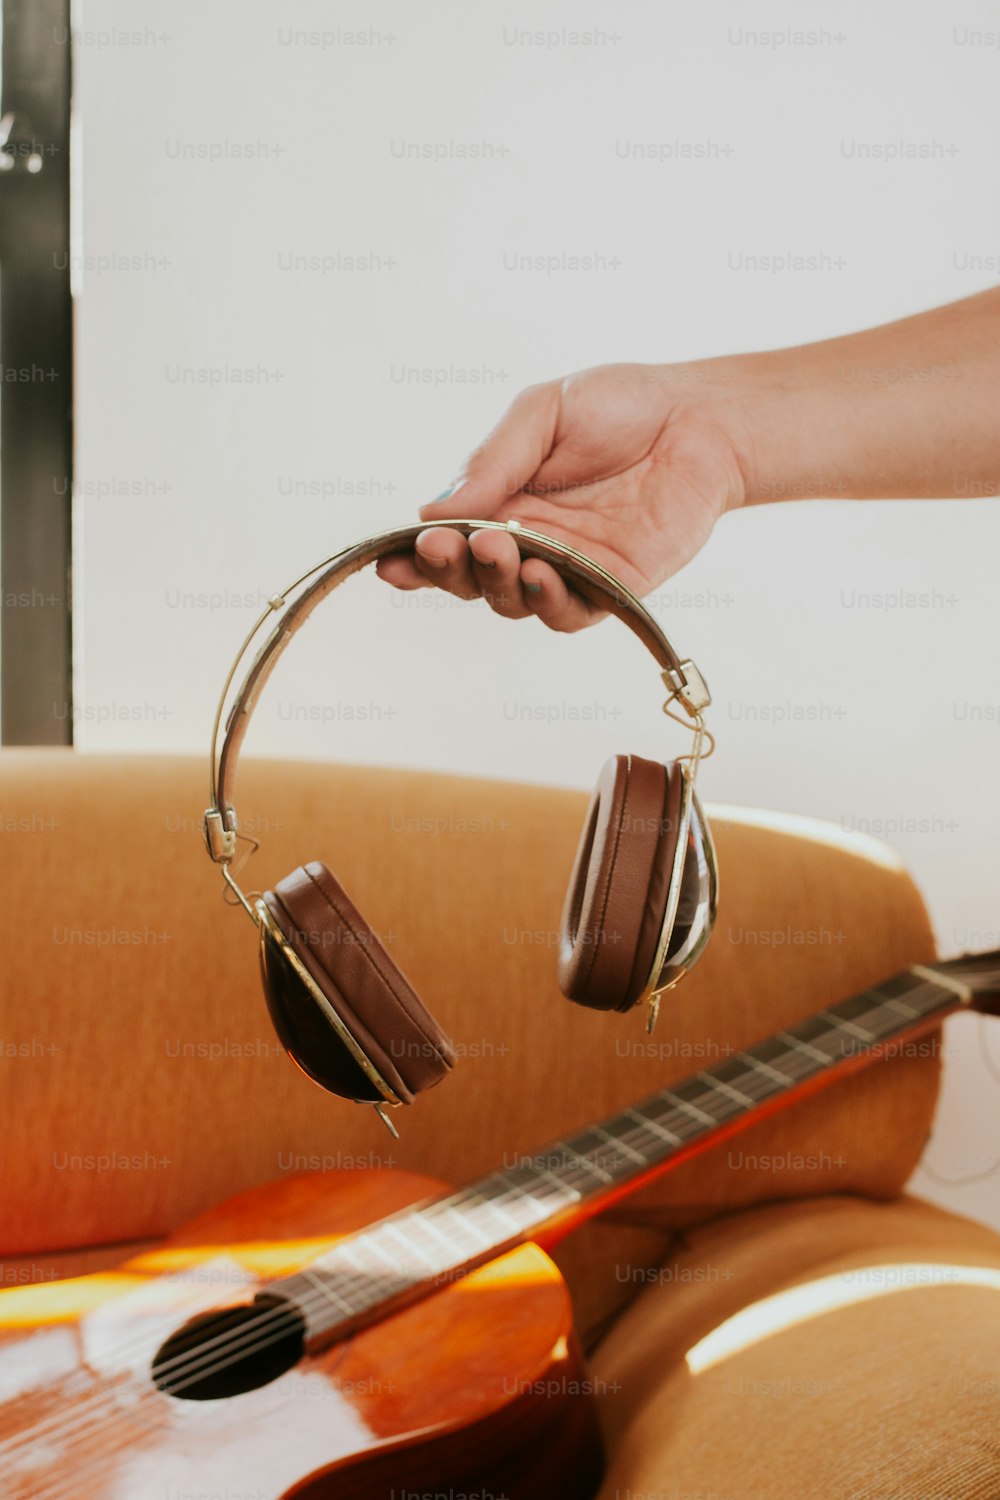 a person holding a pair of headphones in front of a guitar